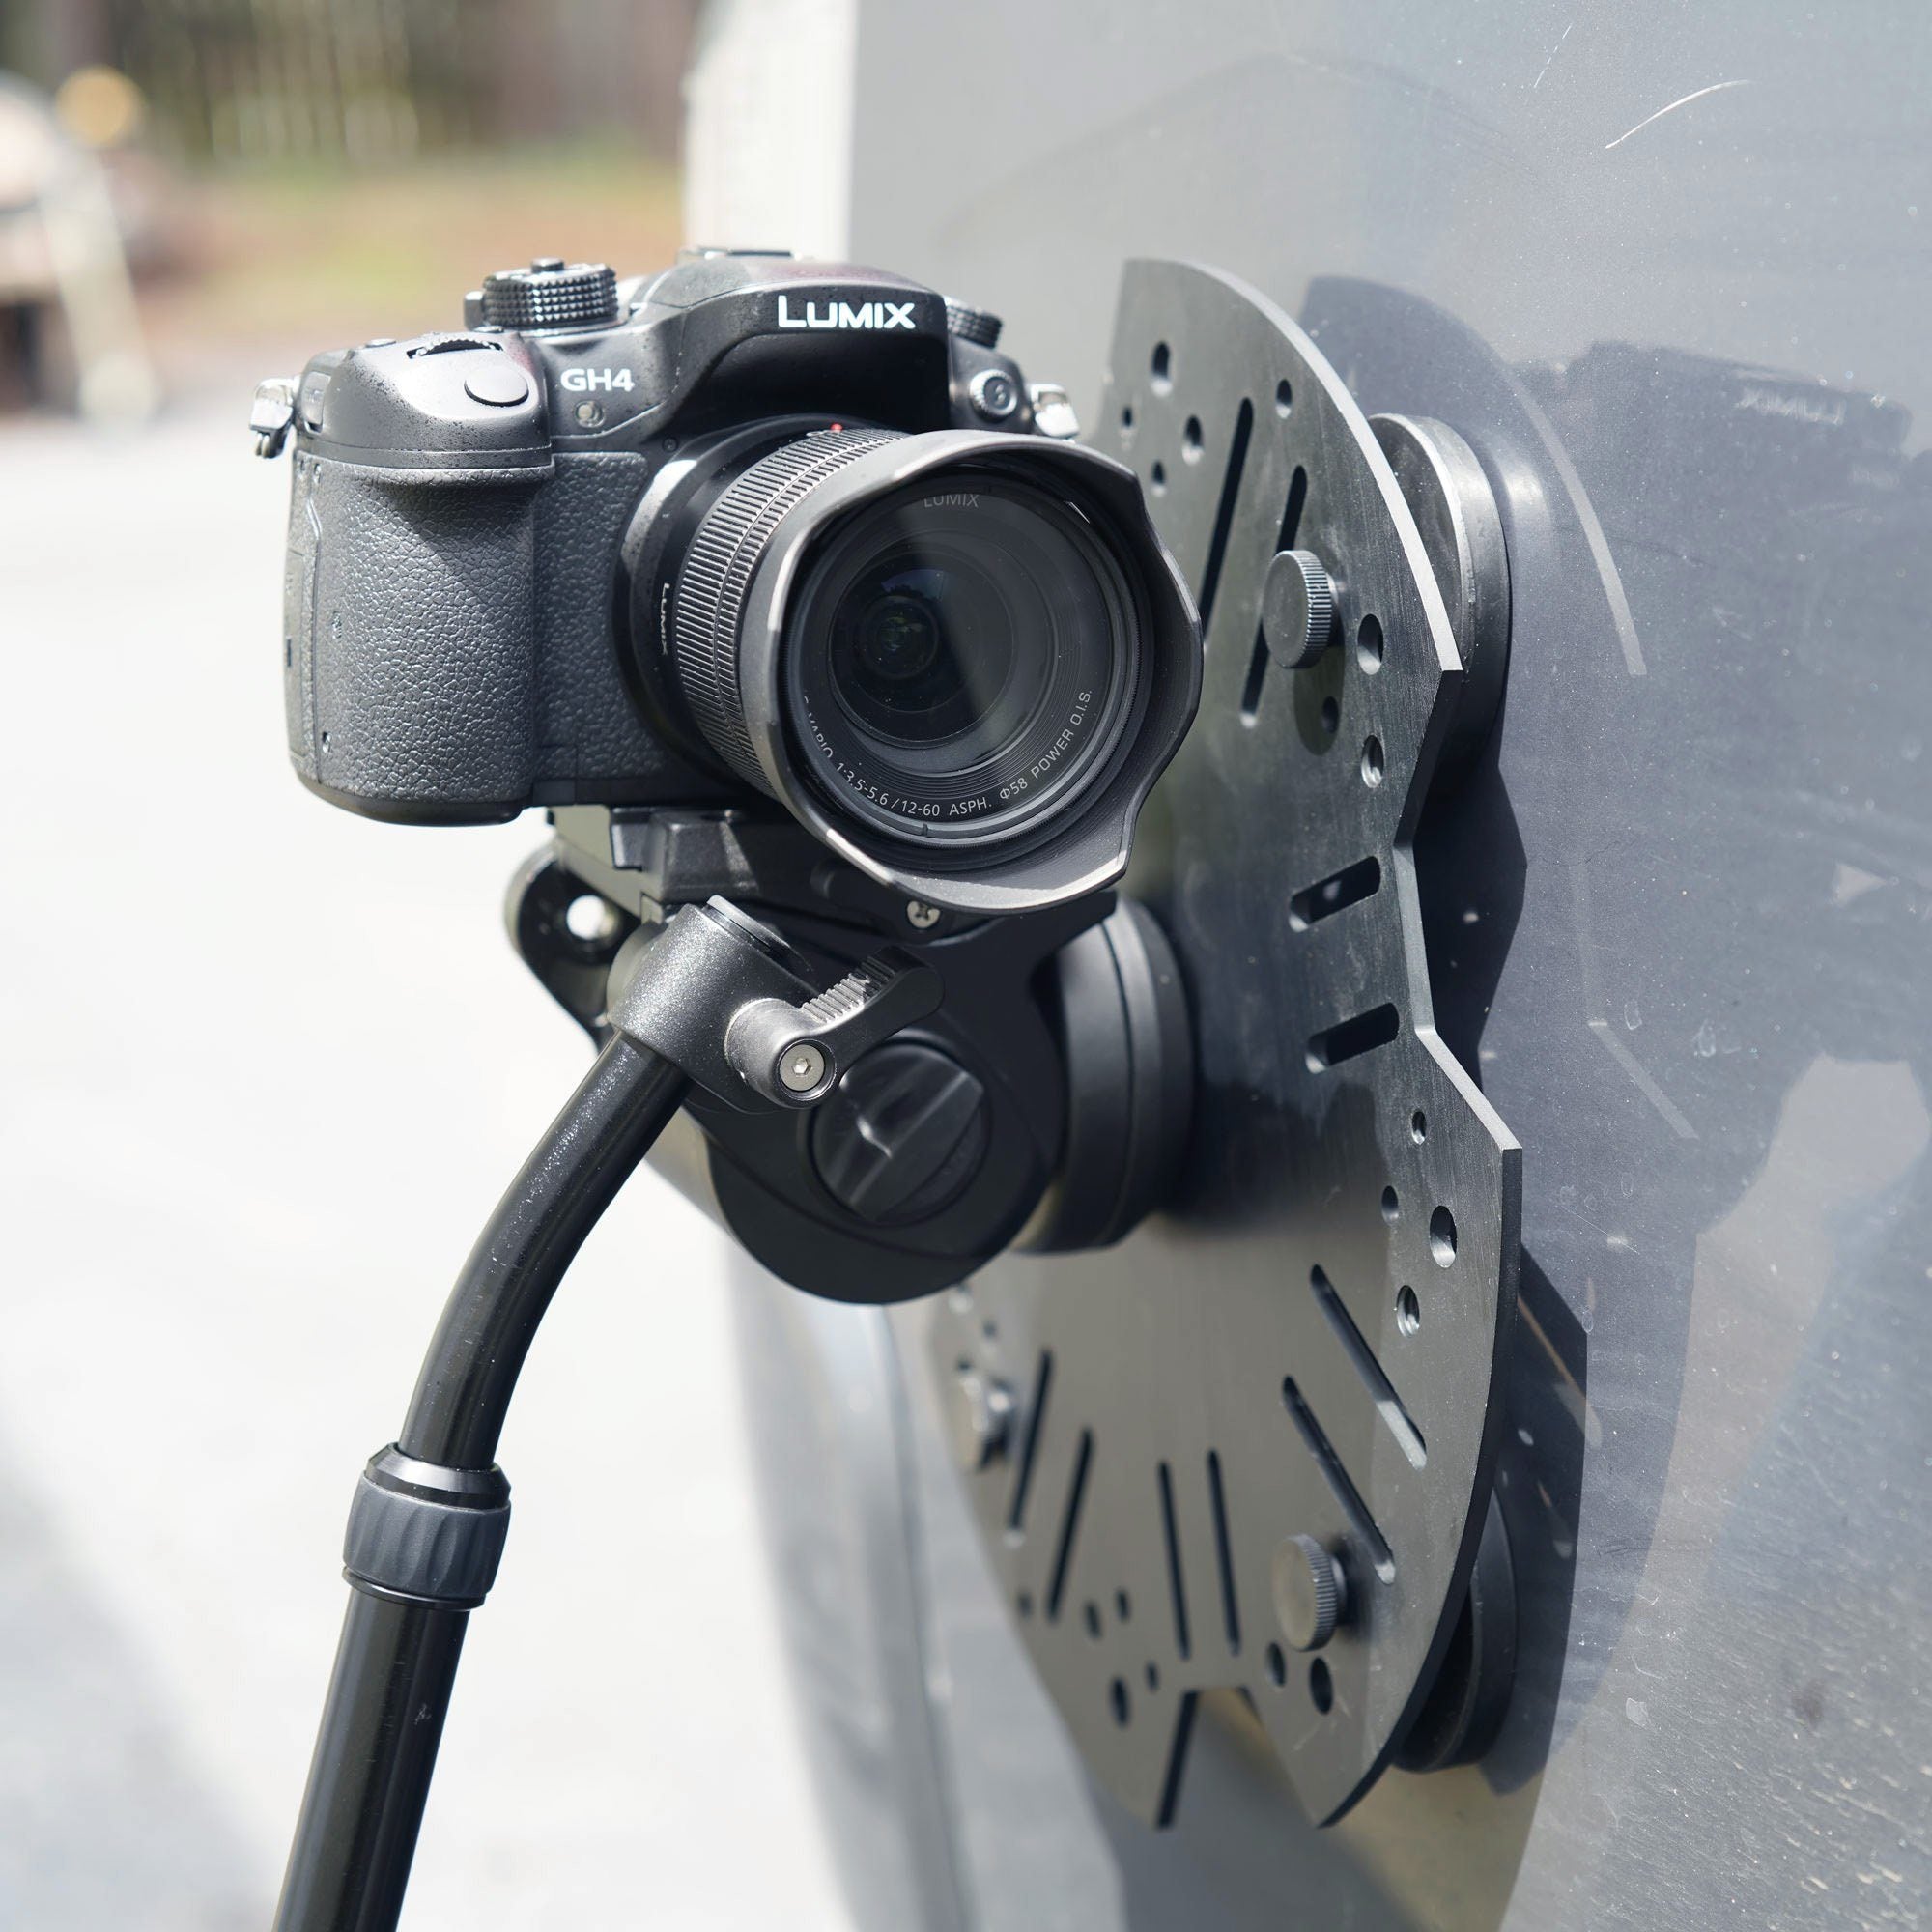 Modus Camera Mounting System - Platform with Vehicle Magnets & Case - PRODUCTS